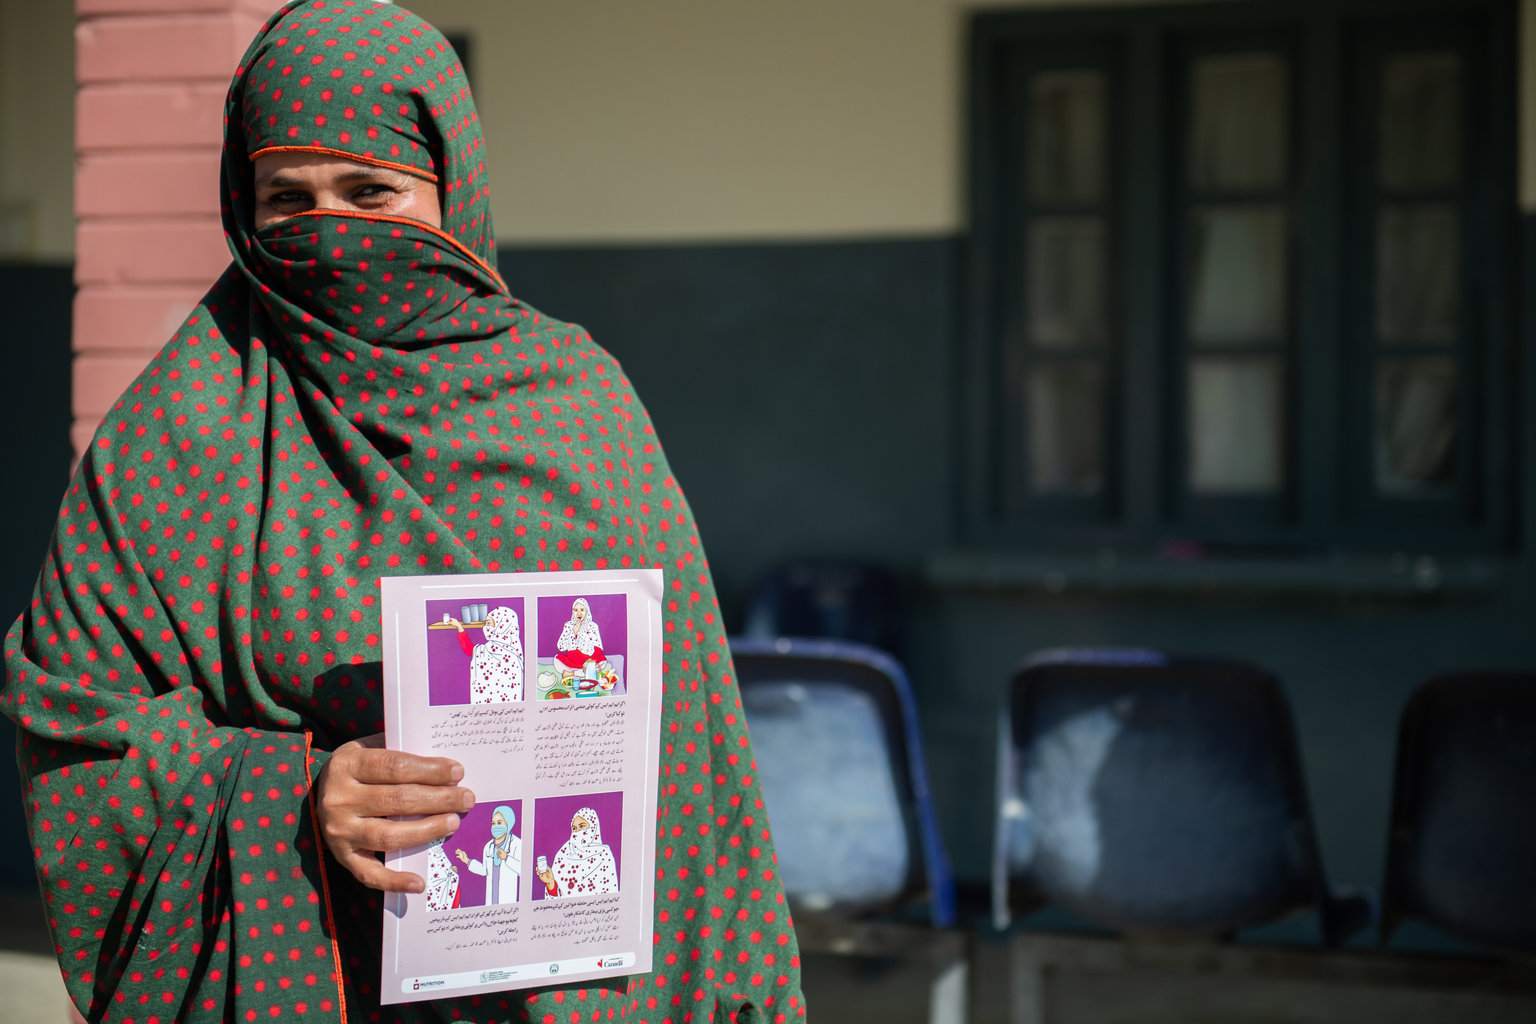 A woman stands outside wearing a niqab that is green and red. She is holding a maternal nutrition pamphlet that has illustration on when and how to consume multiple micronutrient supplements.